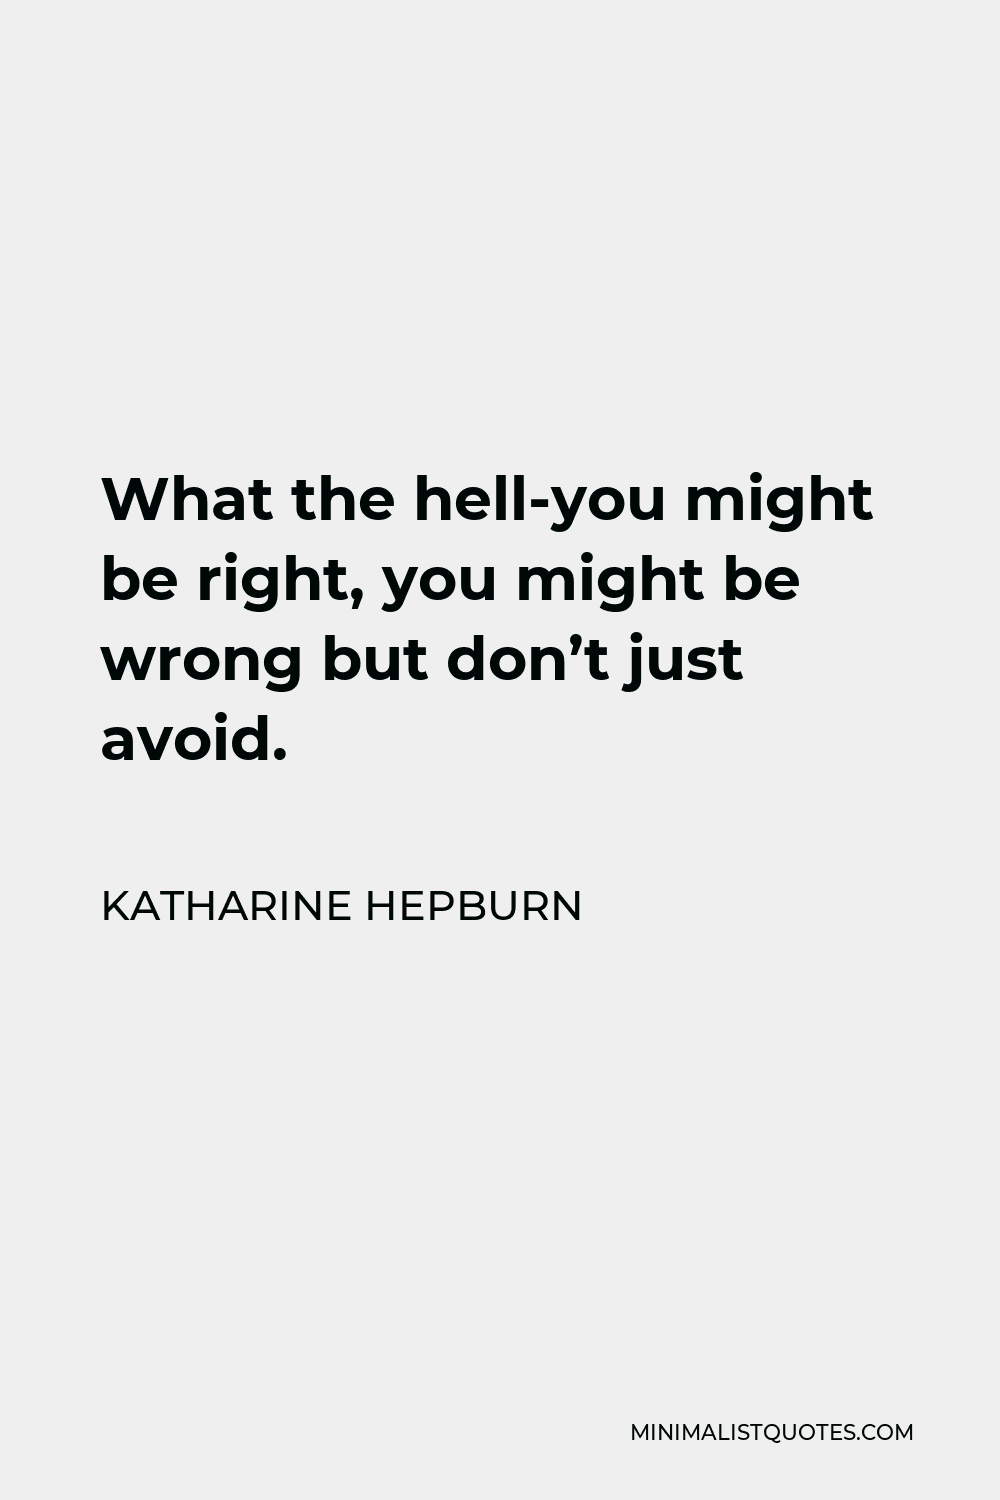 Katharine Hepburn Quote - What the hell-you might be right, you might be wrong but don’t just avoid.